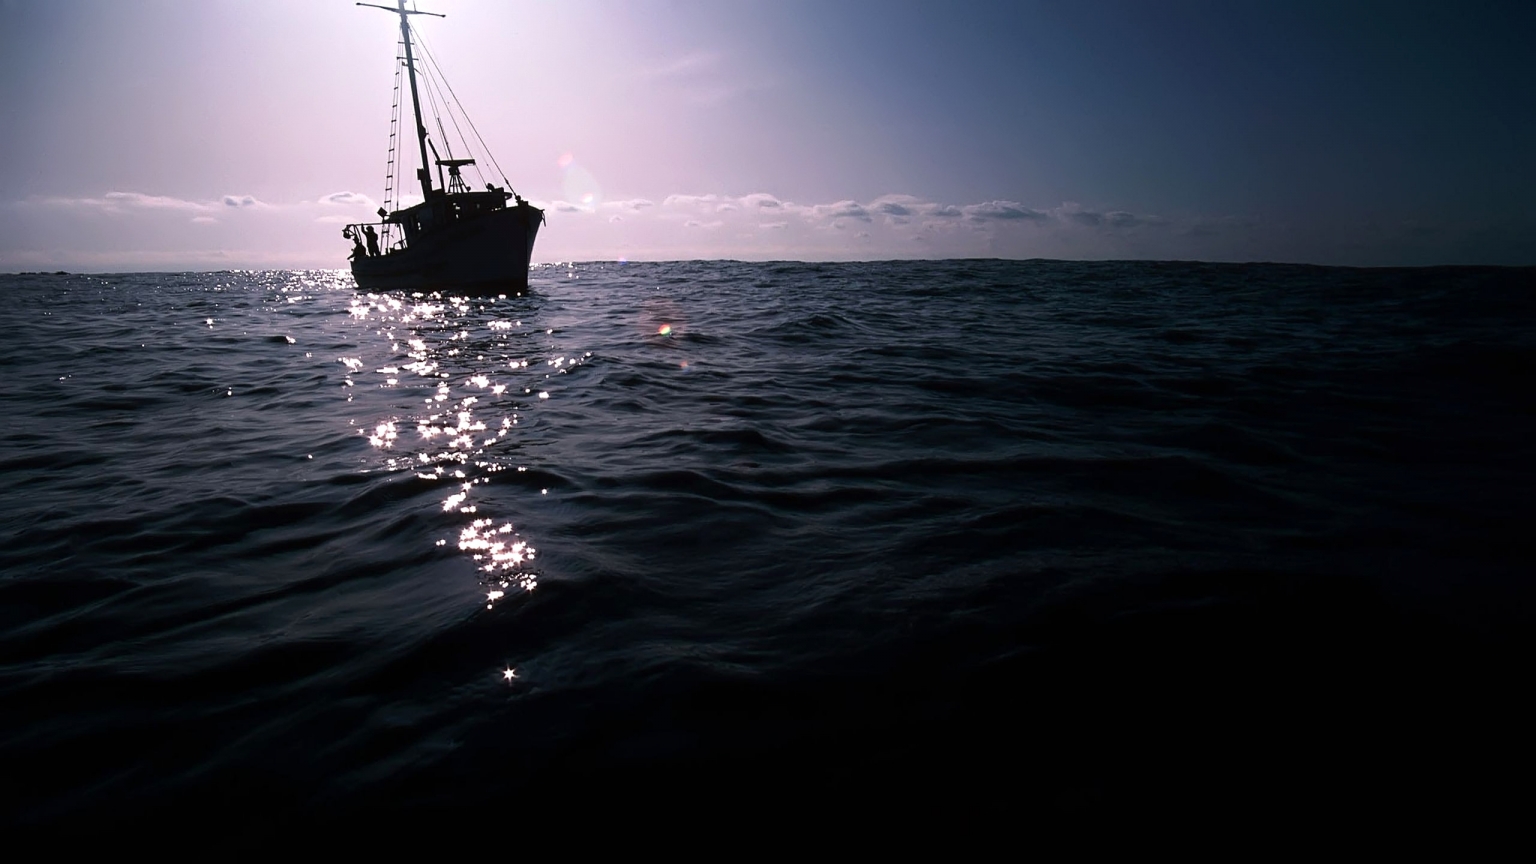 The Dark Boat on Sea for 1536 x 864 HDTV resolution